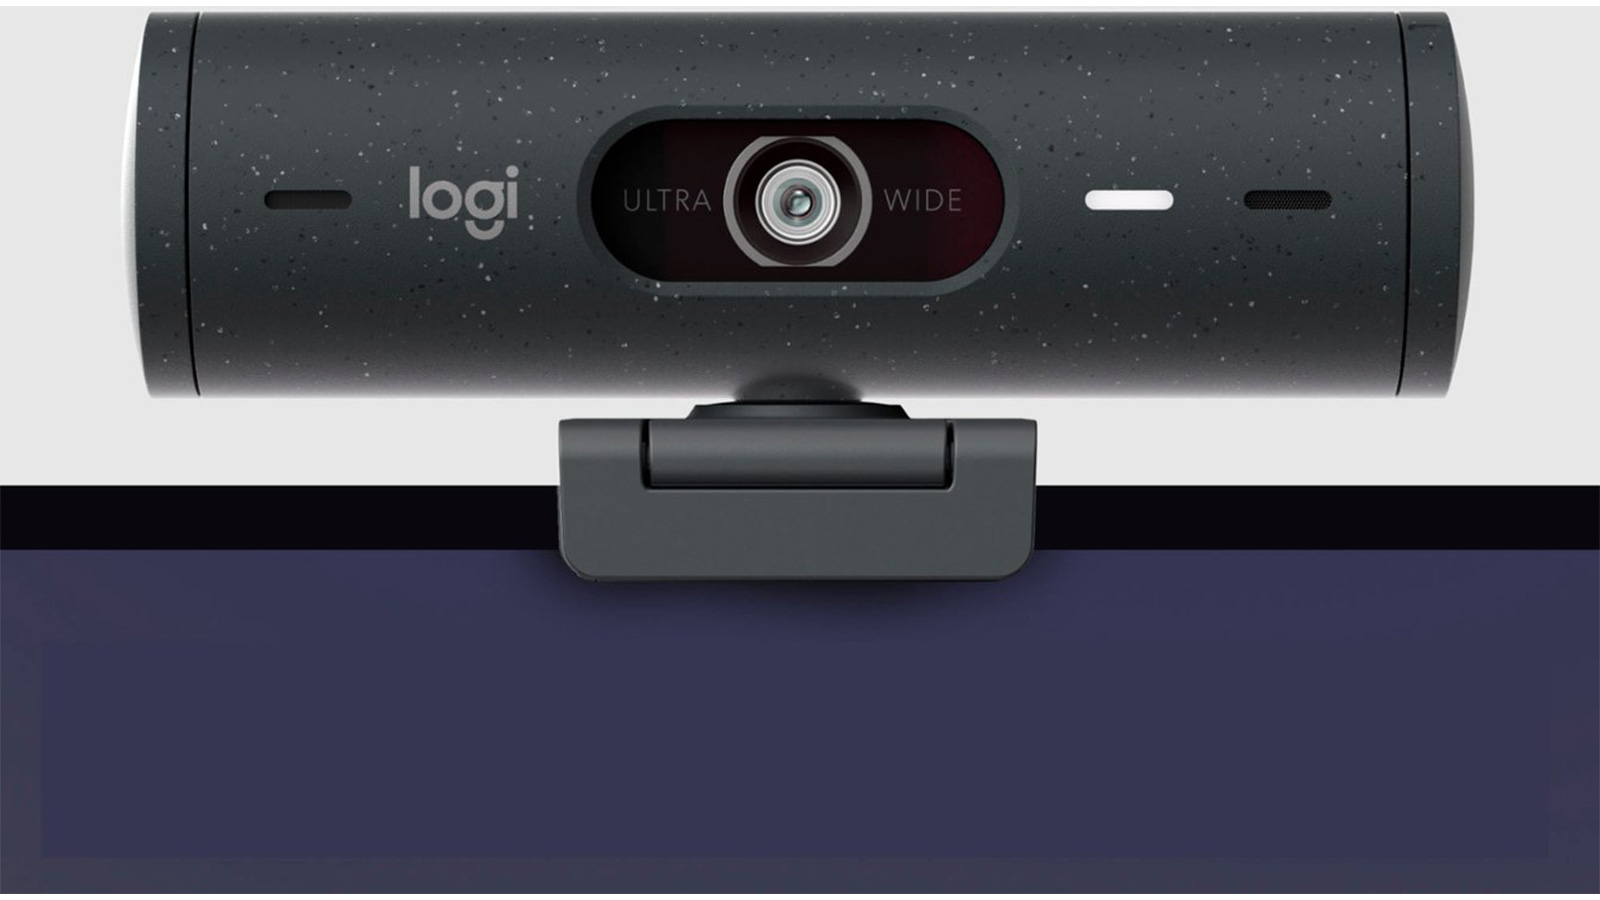 Save up to $30 on some of Logitech's most popular webcams and keyboards at  Best Buy